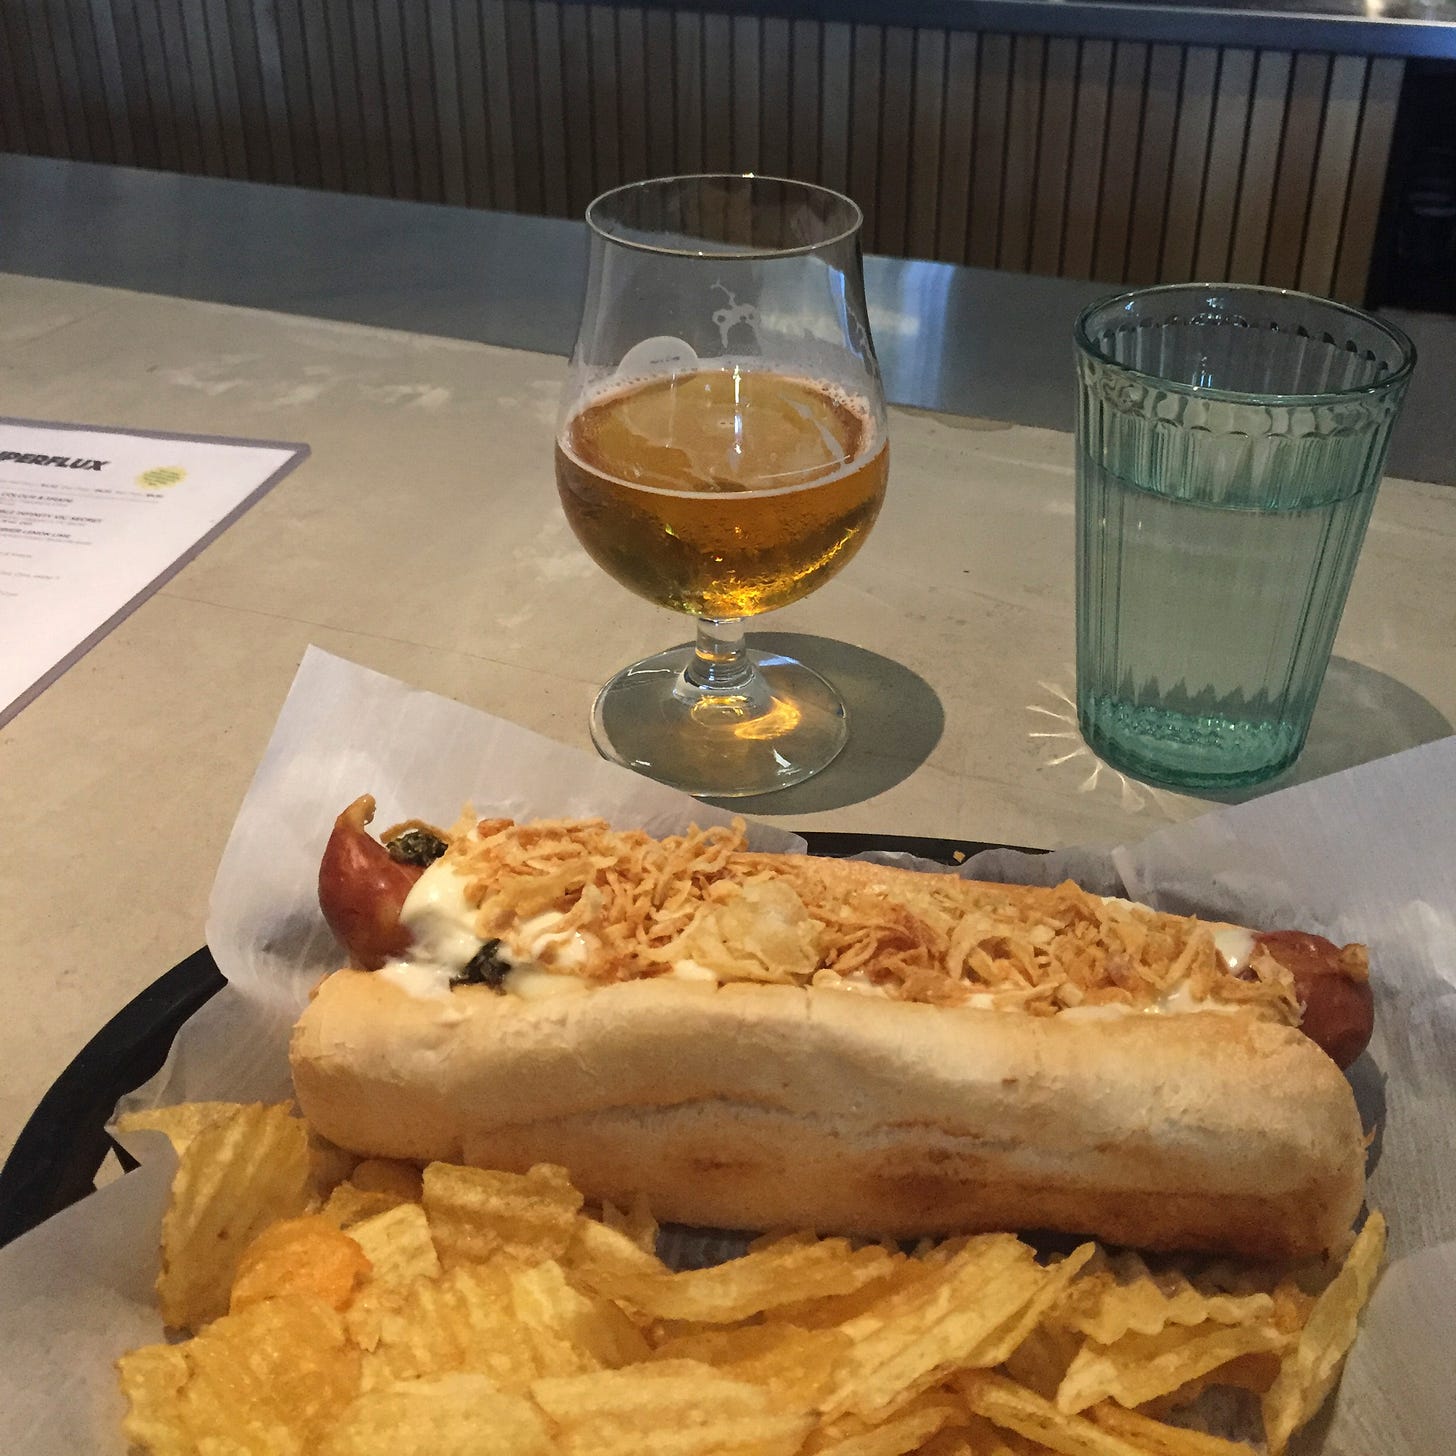 In a black plastic basket lined with parchment, a small pile of ripple chips is in the foreground next to a hot dog, which is covered with crispy onions, mayo, and chimichurri. A tulip glass of beer is on the bar behind it, next to a glass of water.